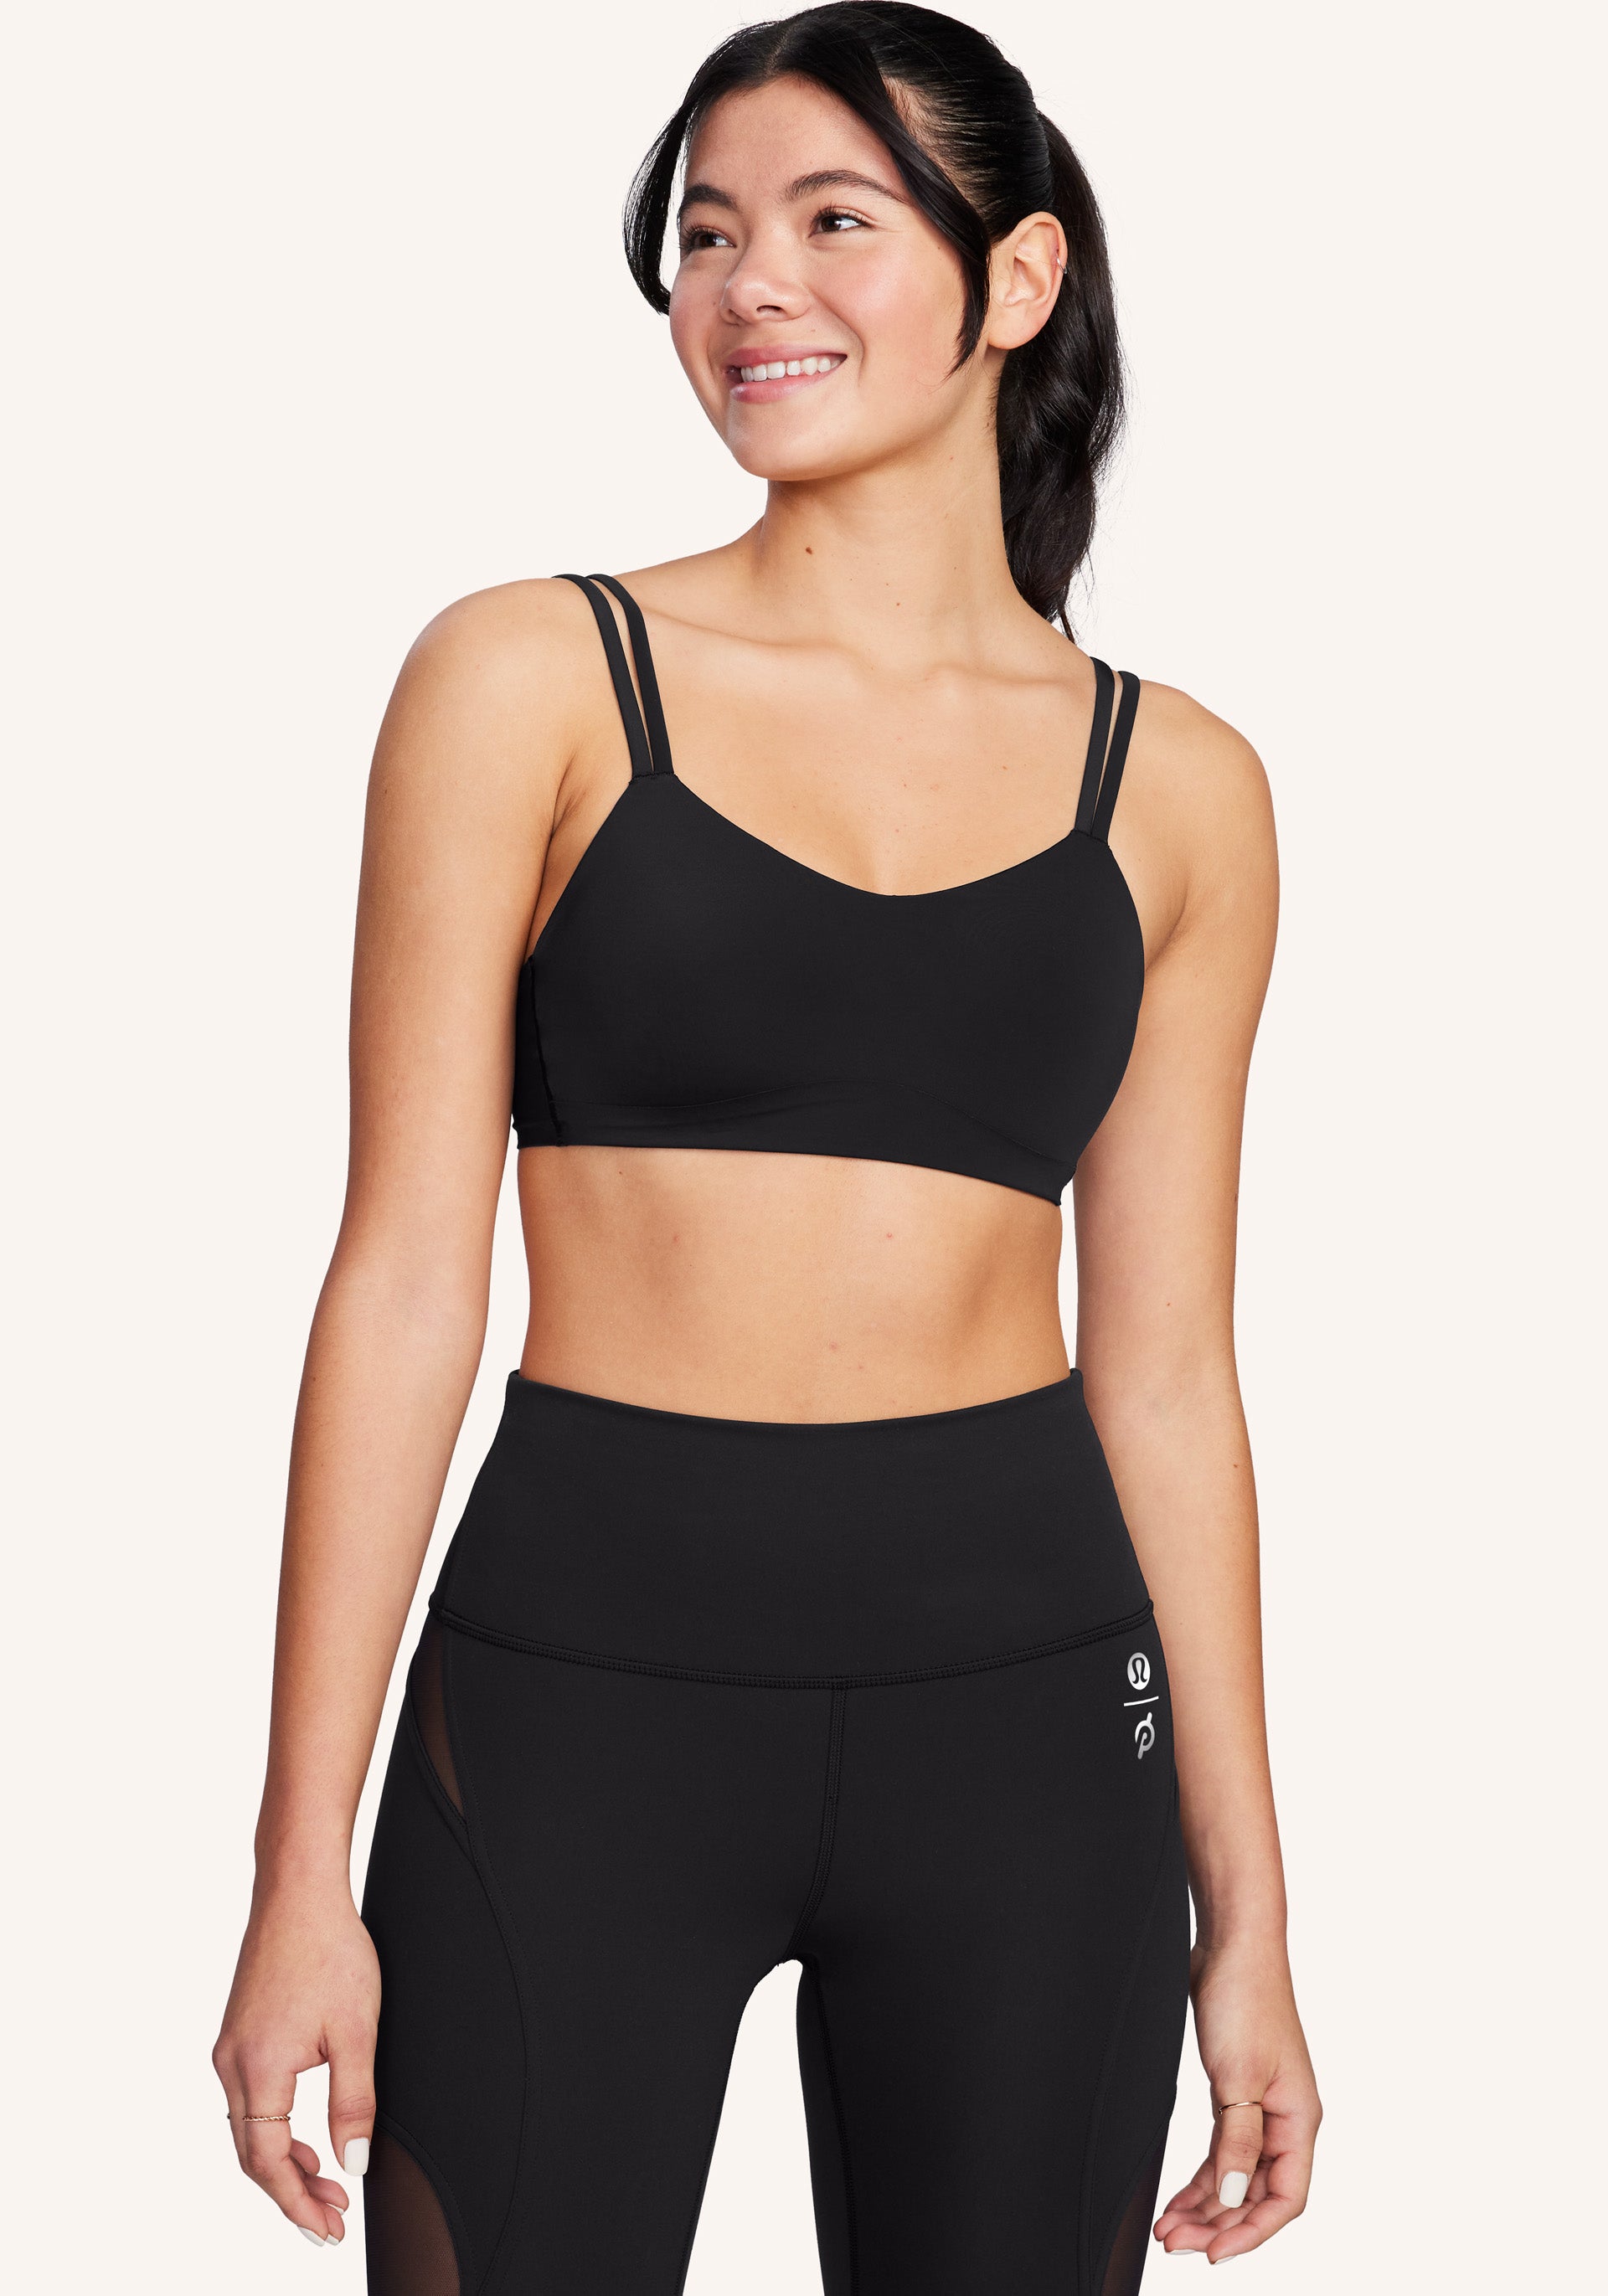 https://apparel.onepeloton.ca/cdn/shop/files/LikeaCloudBraLightSupportB_CCup-BLACK-size-00-size-0-size-2-size-4-size-6-size-8-size-10-size-12-size-14-1-front-pdp-hide_1920x.jpg?v=1702487971